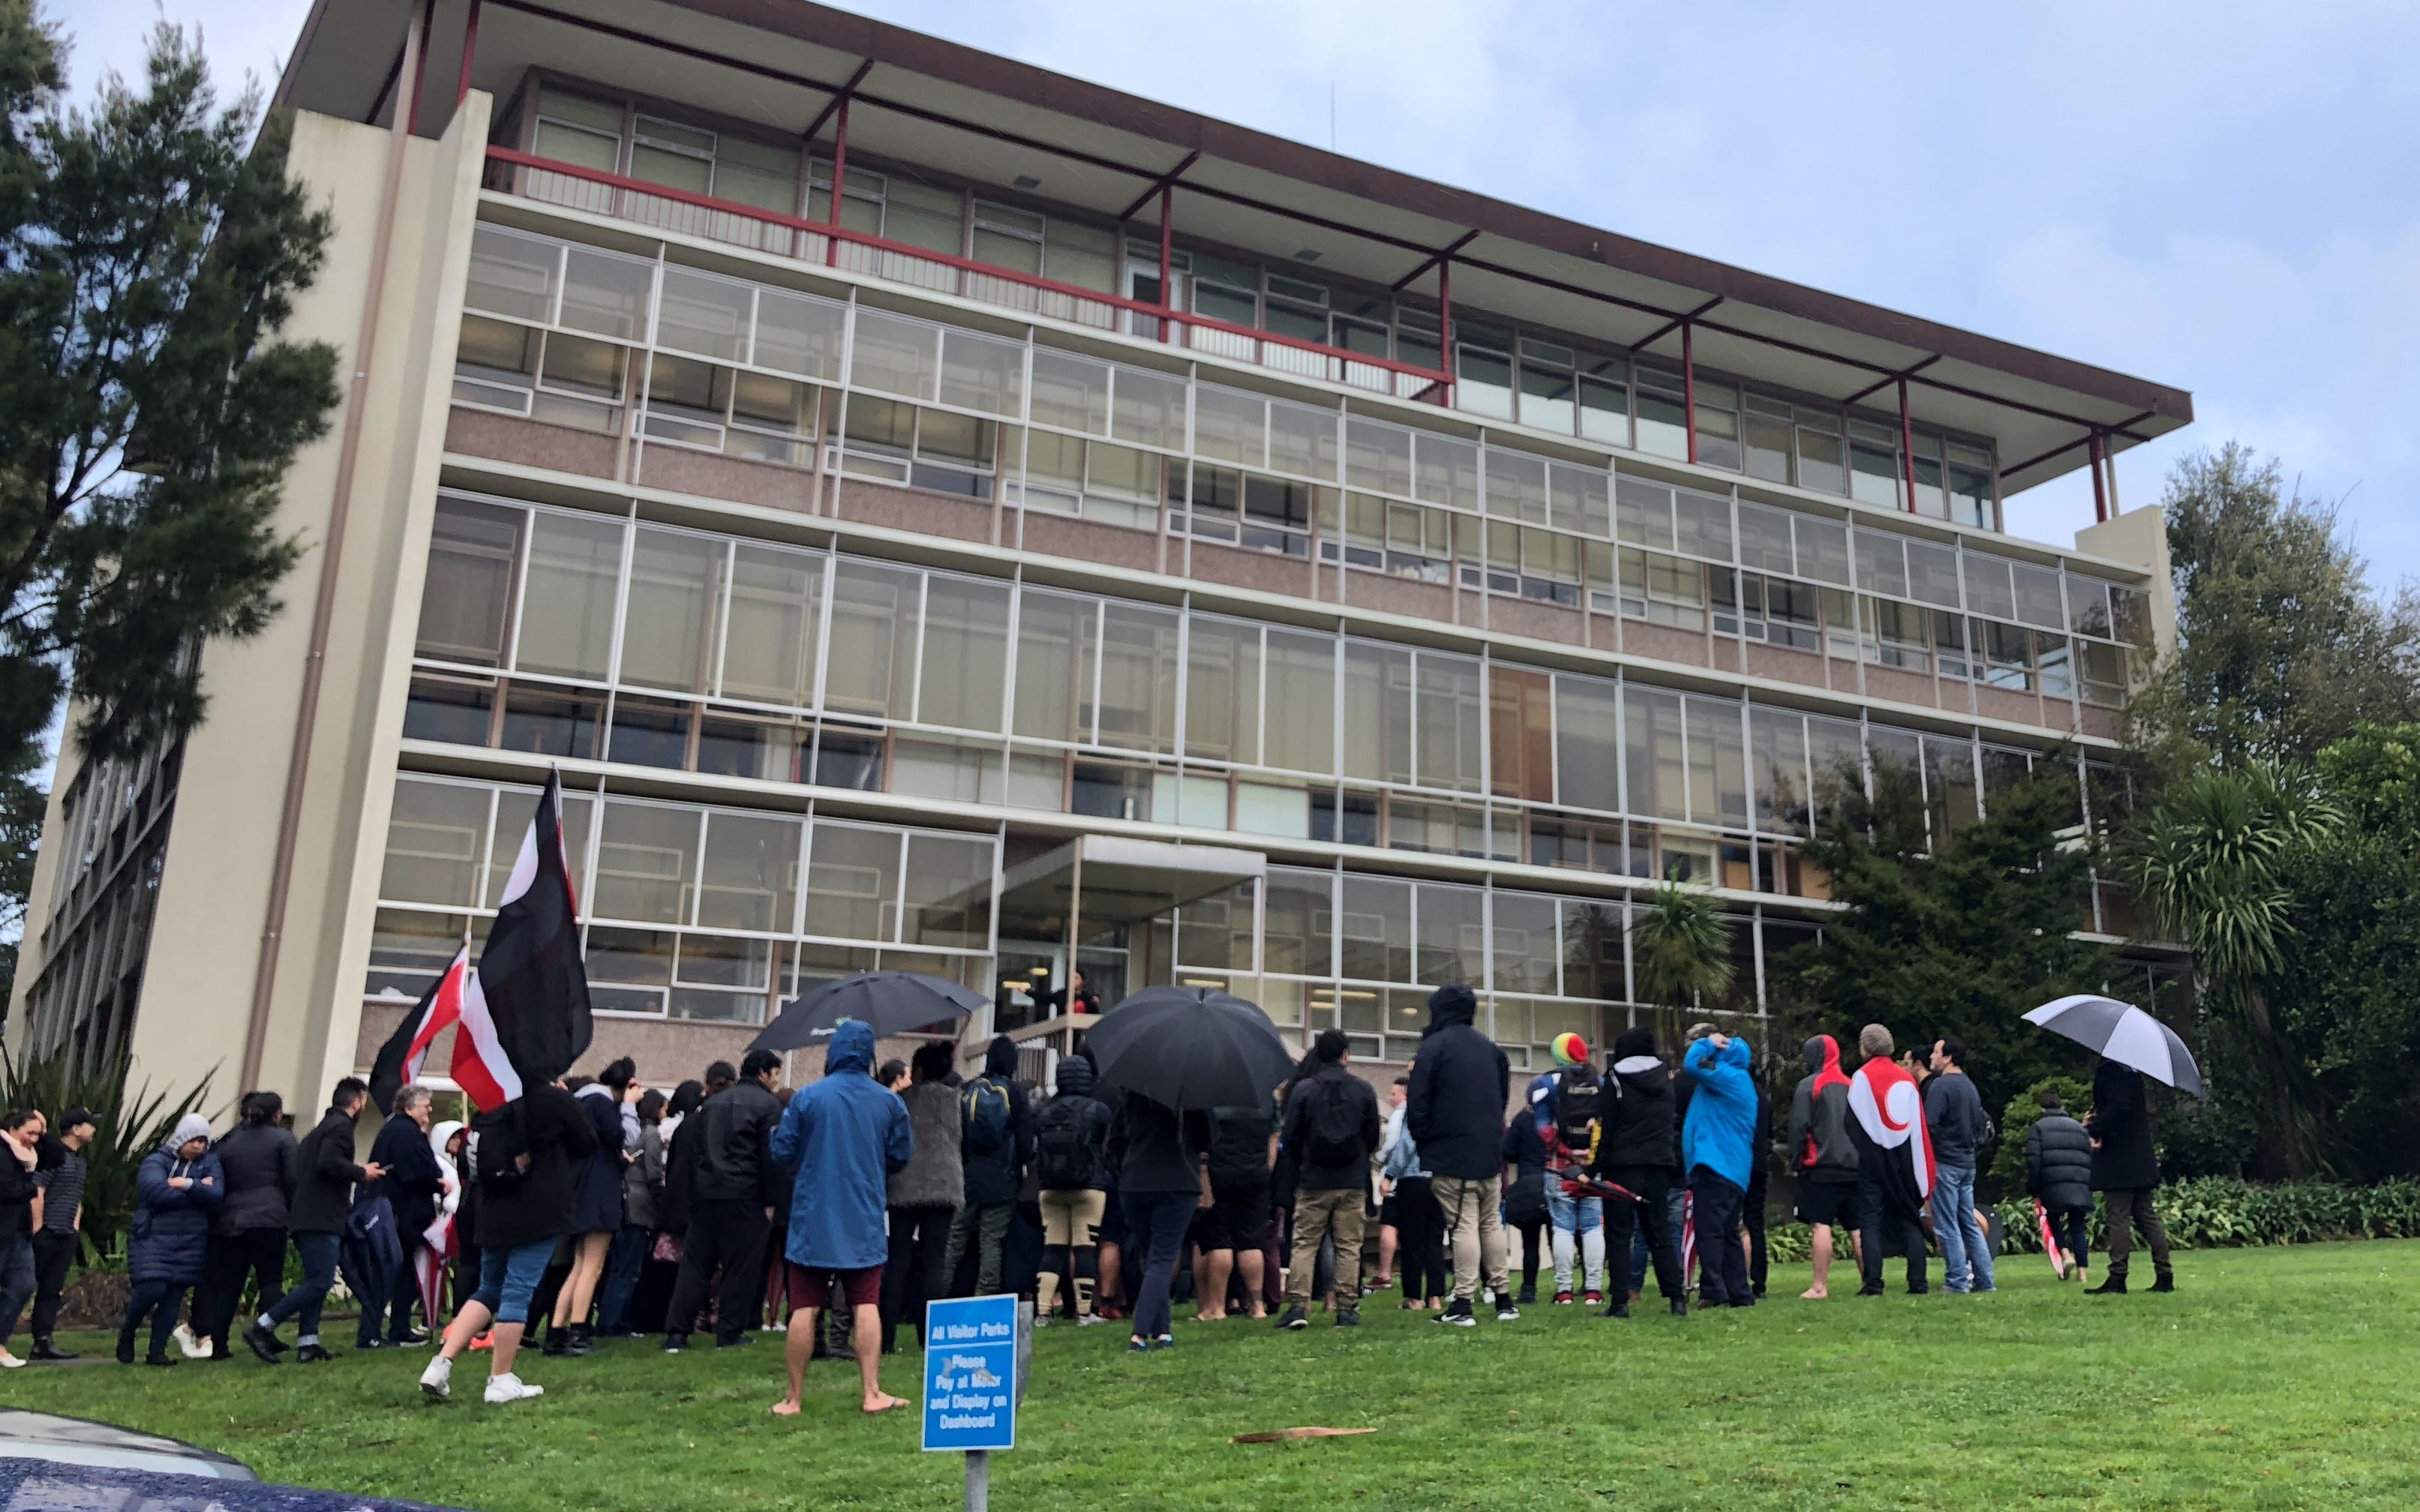 Students and staff at the University of Waikato are disappointed with a proposal to scrap the Faculty of Māori and Indigenous Studies.